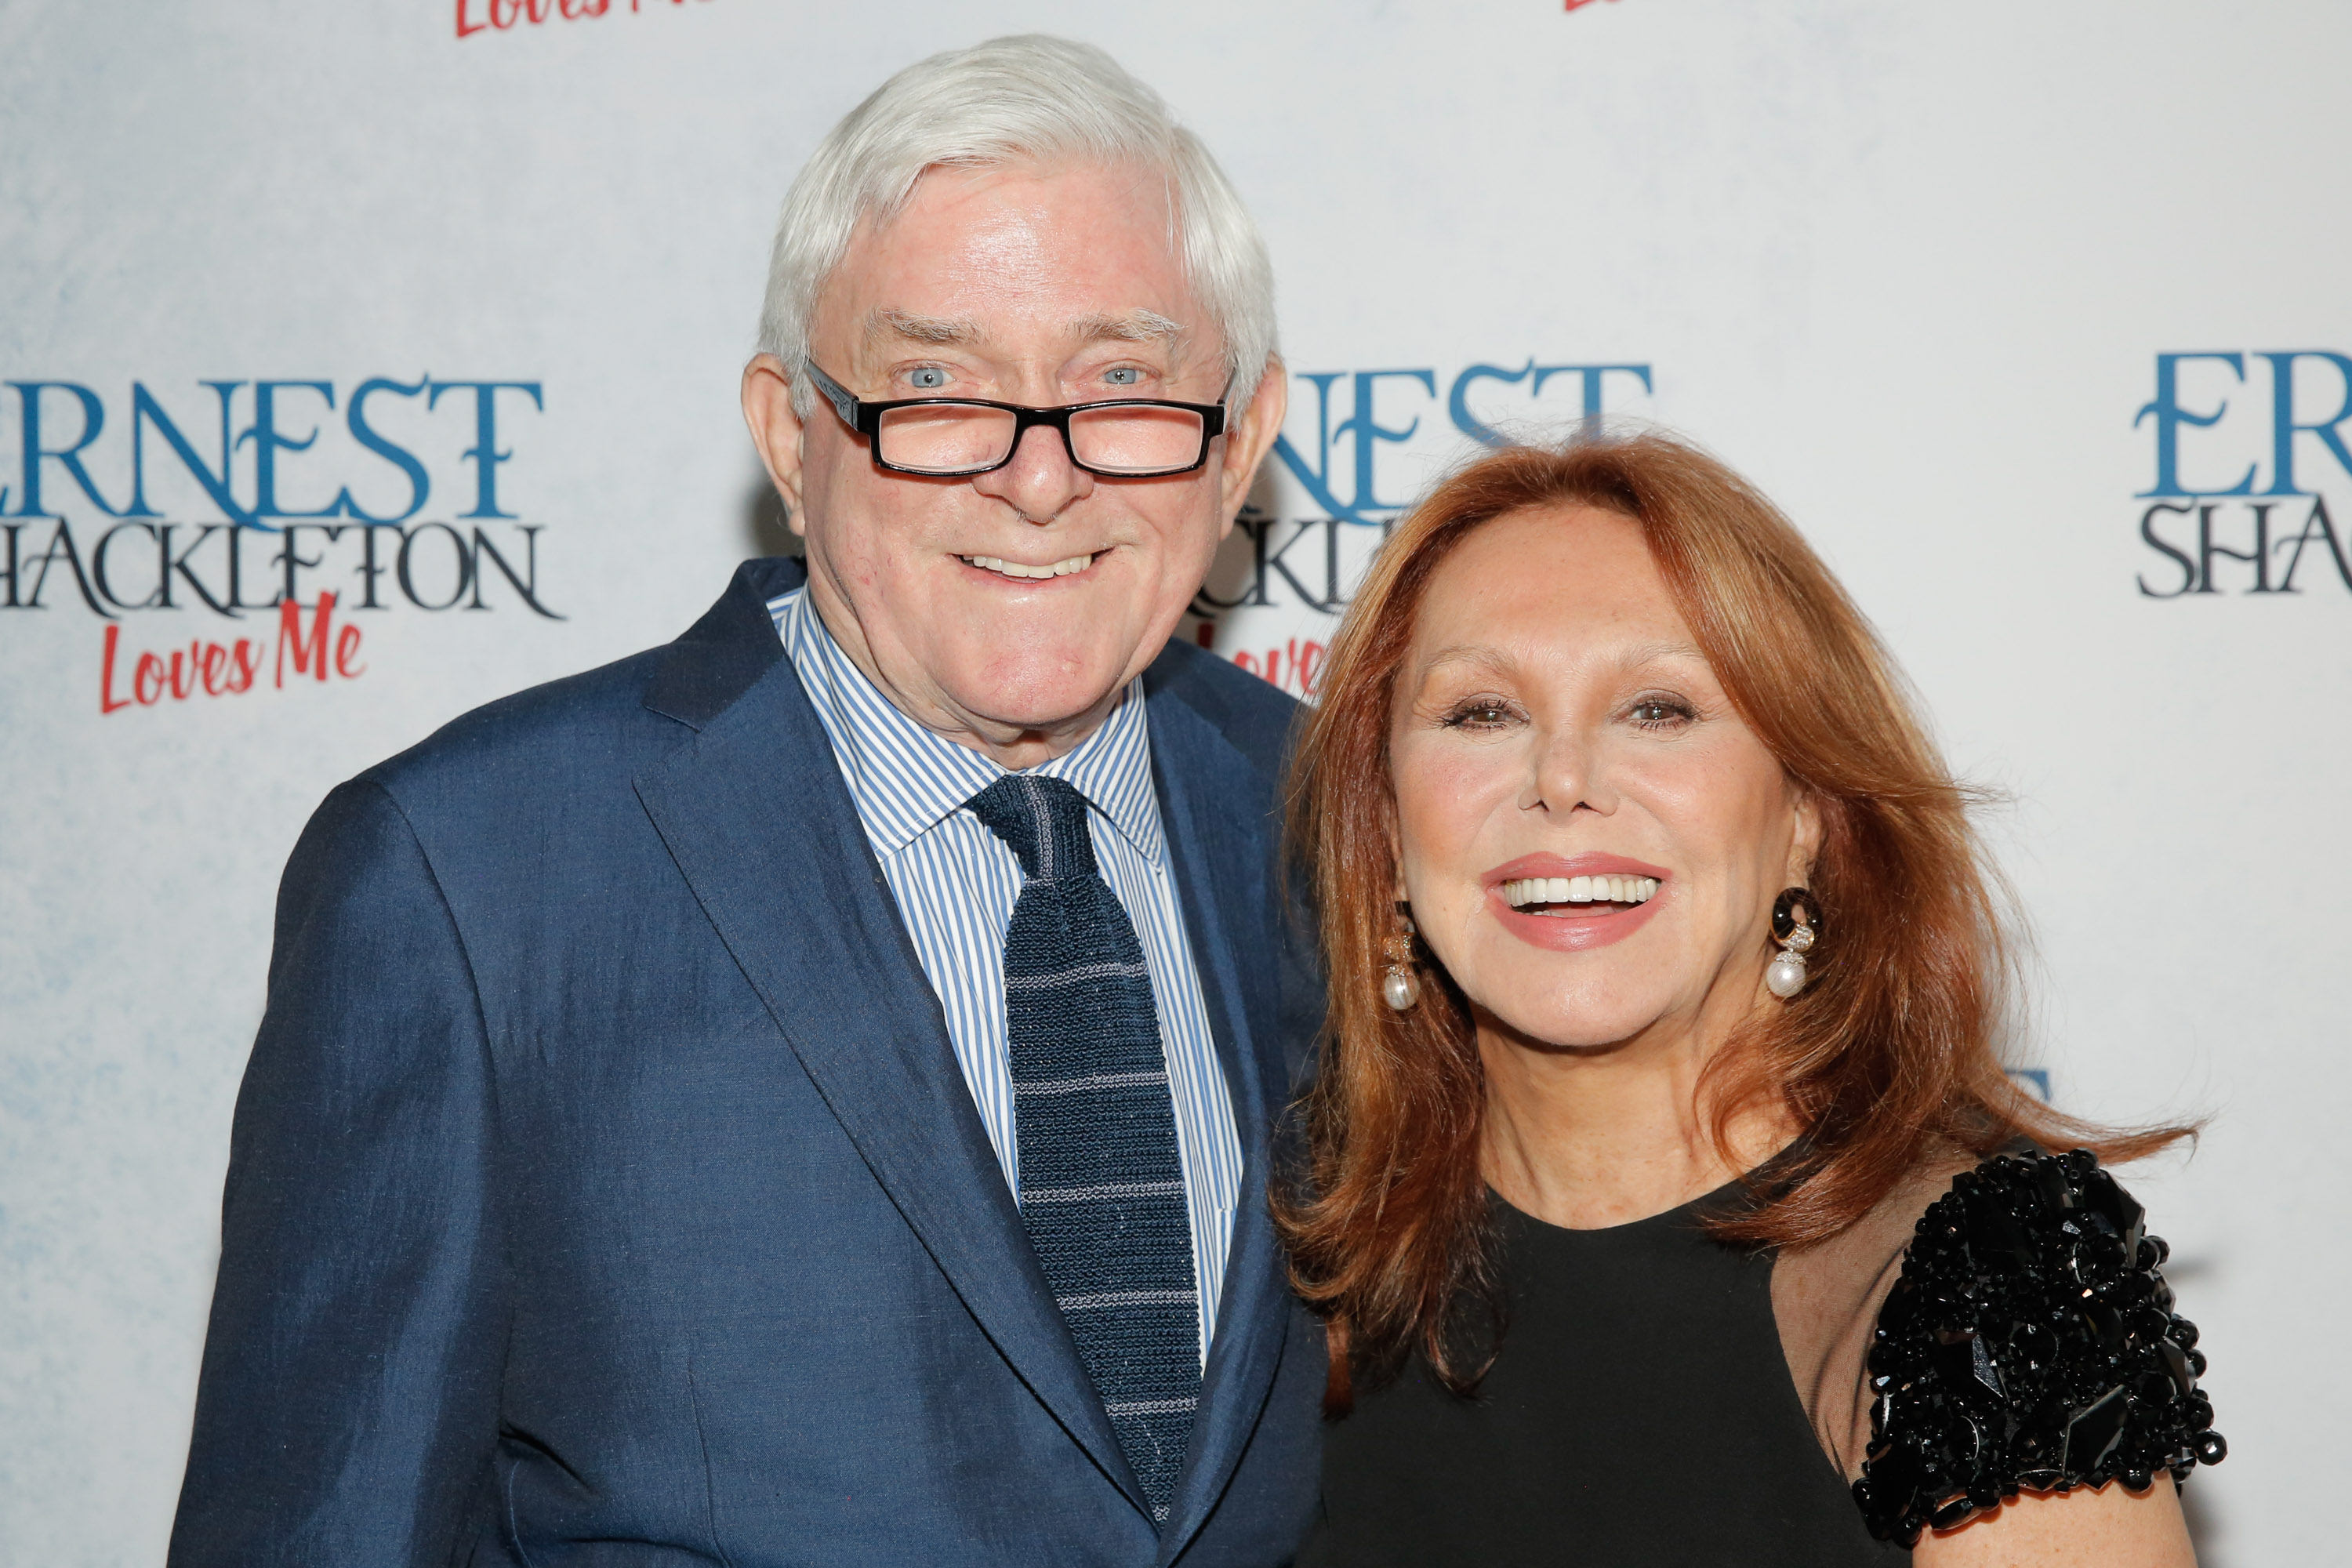 Phil Donahue and Marlo Thomas attend the Off-Broadway opening of "Ernest Shackleton Loves Me" at the Tony Kiser Theatre on May 7, 2017 in New York City | Source: Getty Images